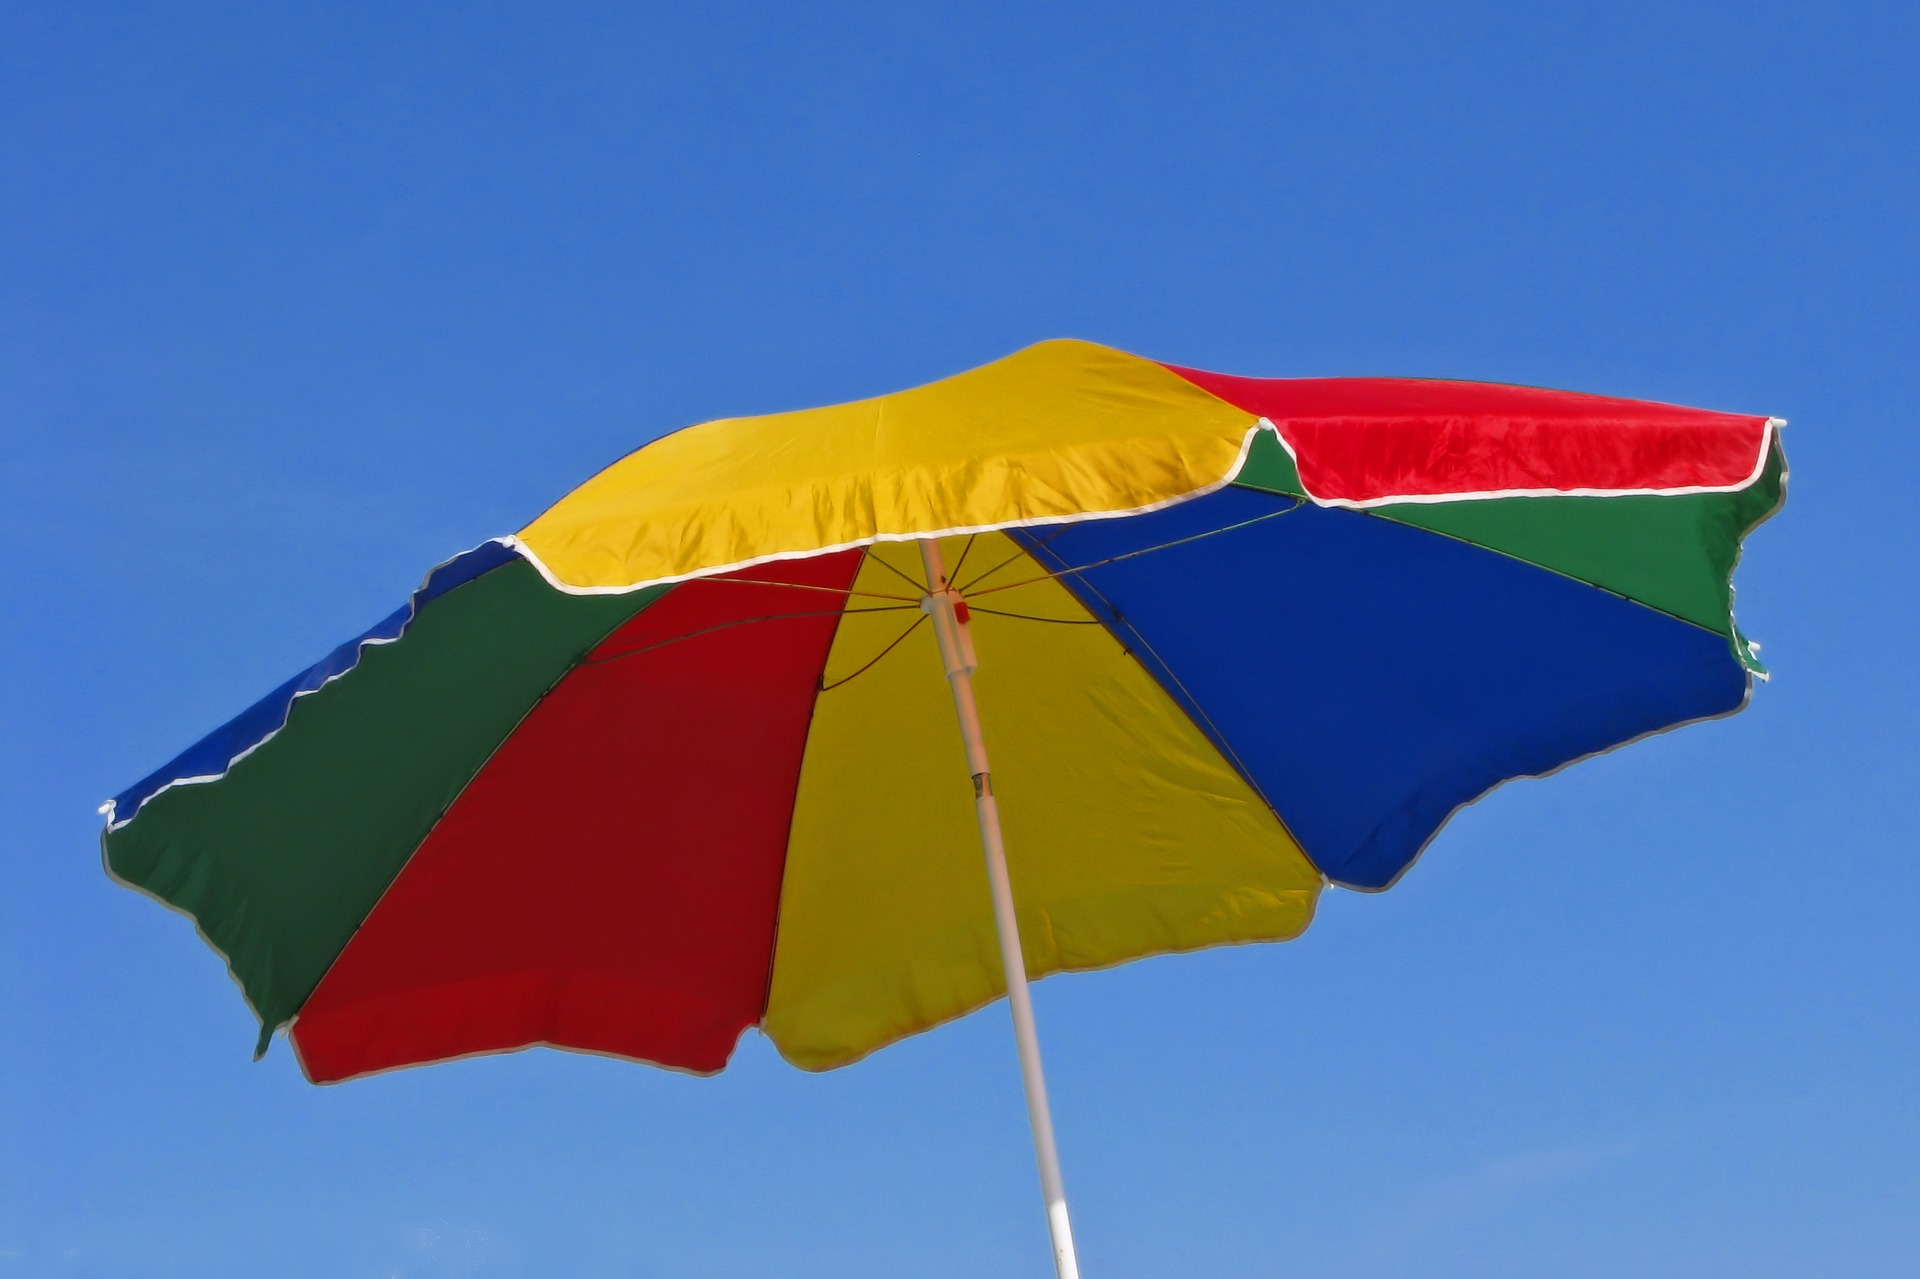 give your AC unit some shade with a beach umbrella? This is what the experts said.